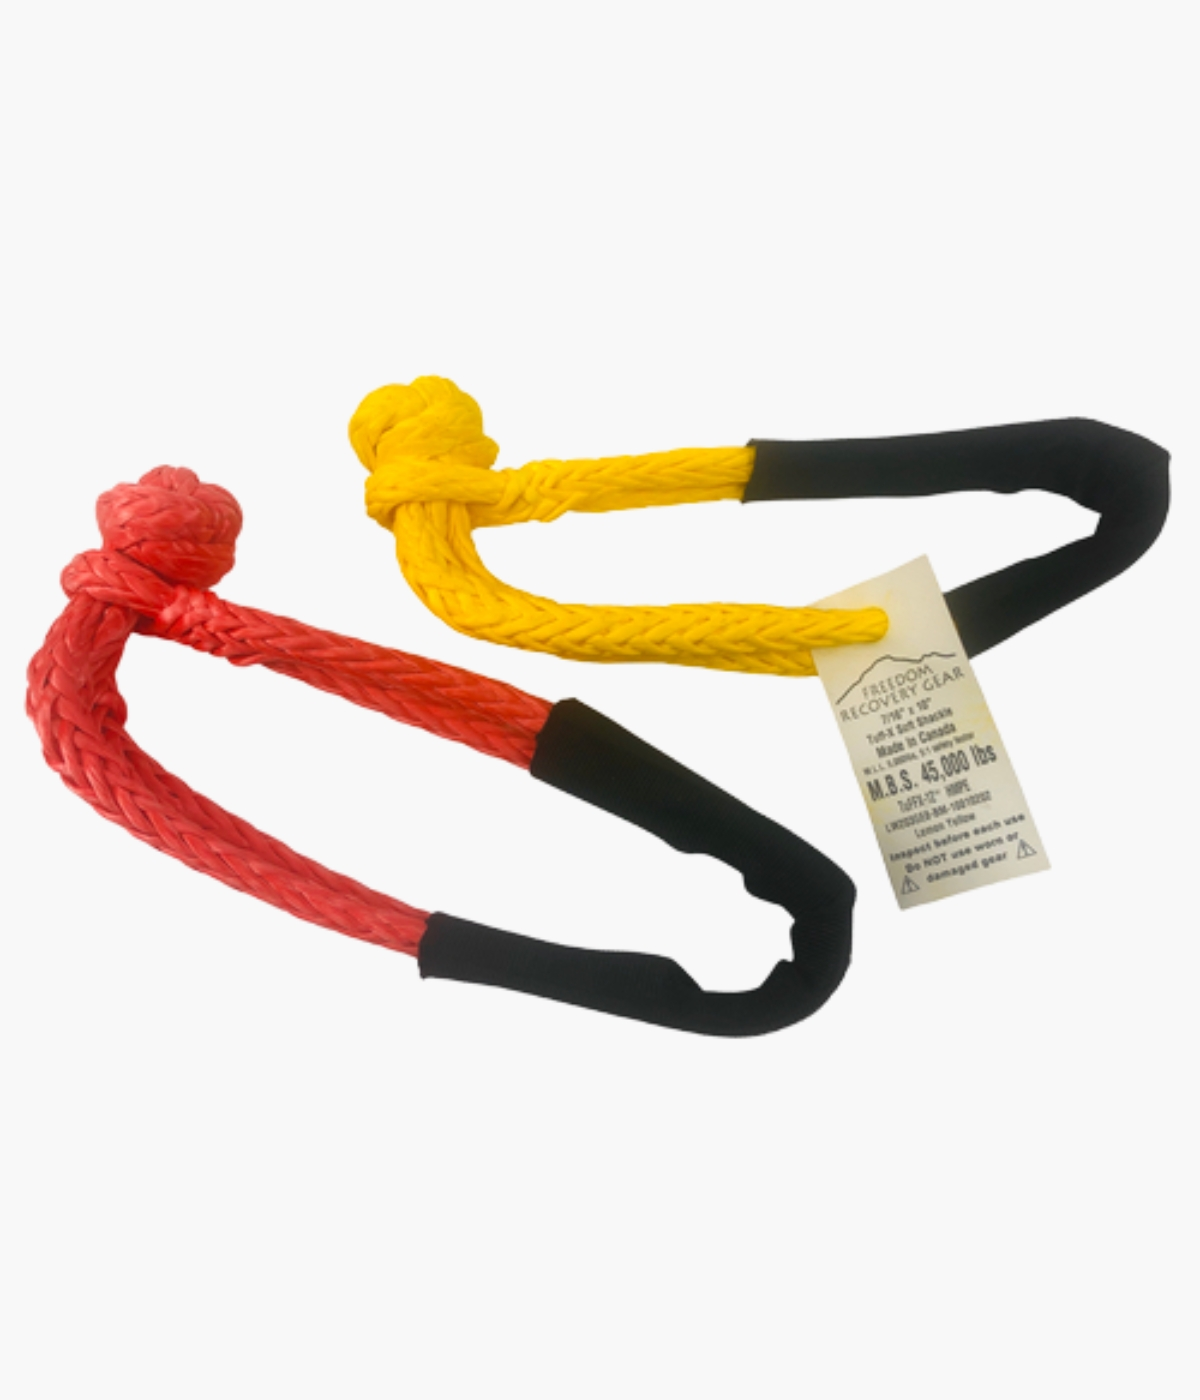 Freedom Recovery Gear - 3/8 x 9" Tuff-X Soft Shackle with chafe guard HMPE- Yellow. MBS 35,000# - 719710722910